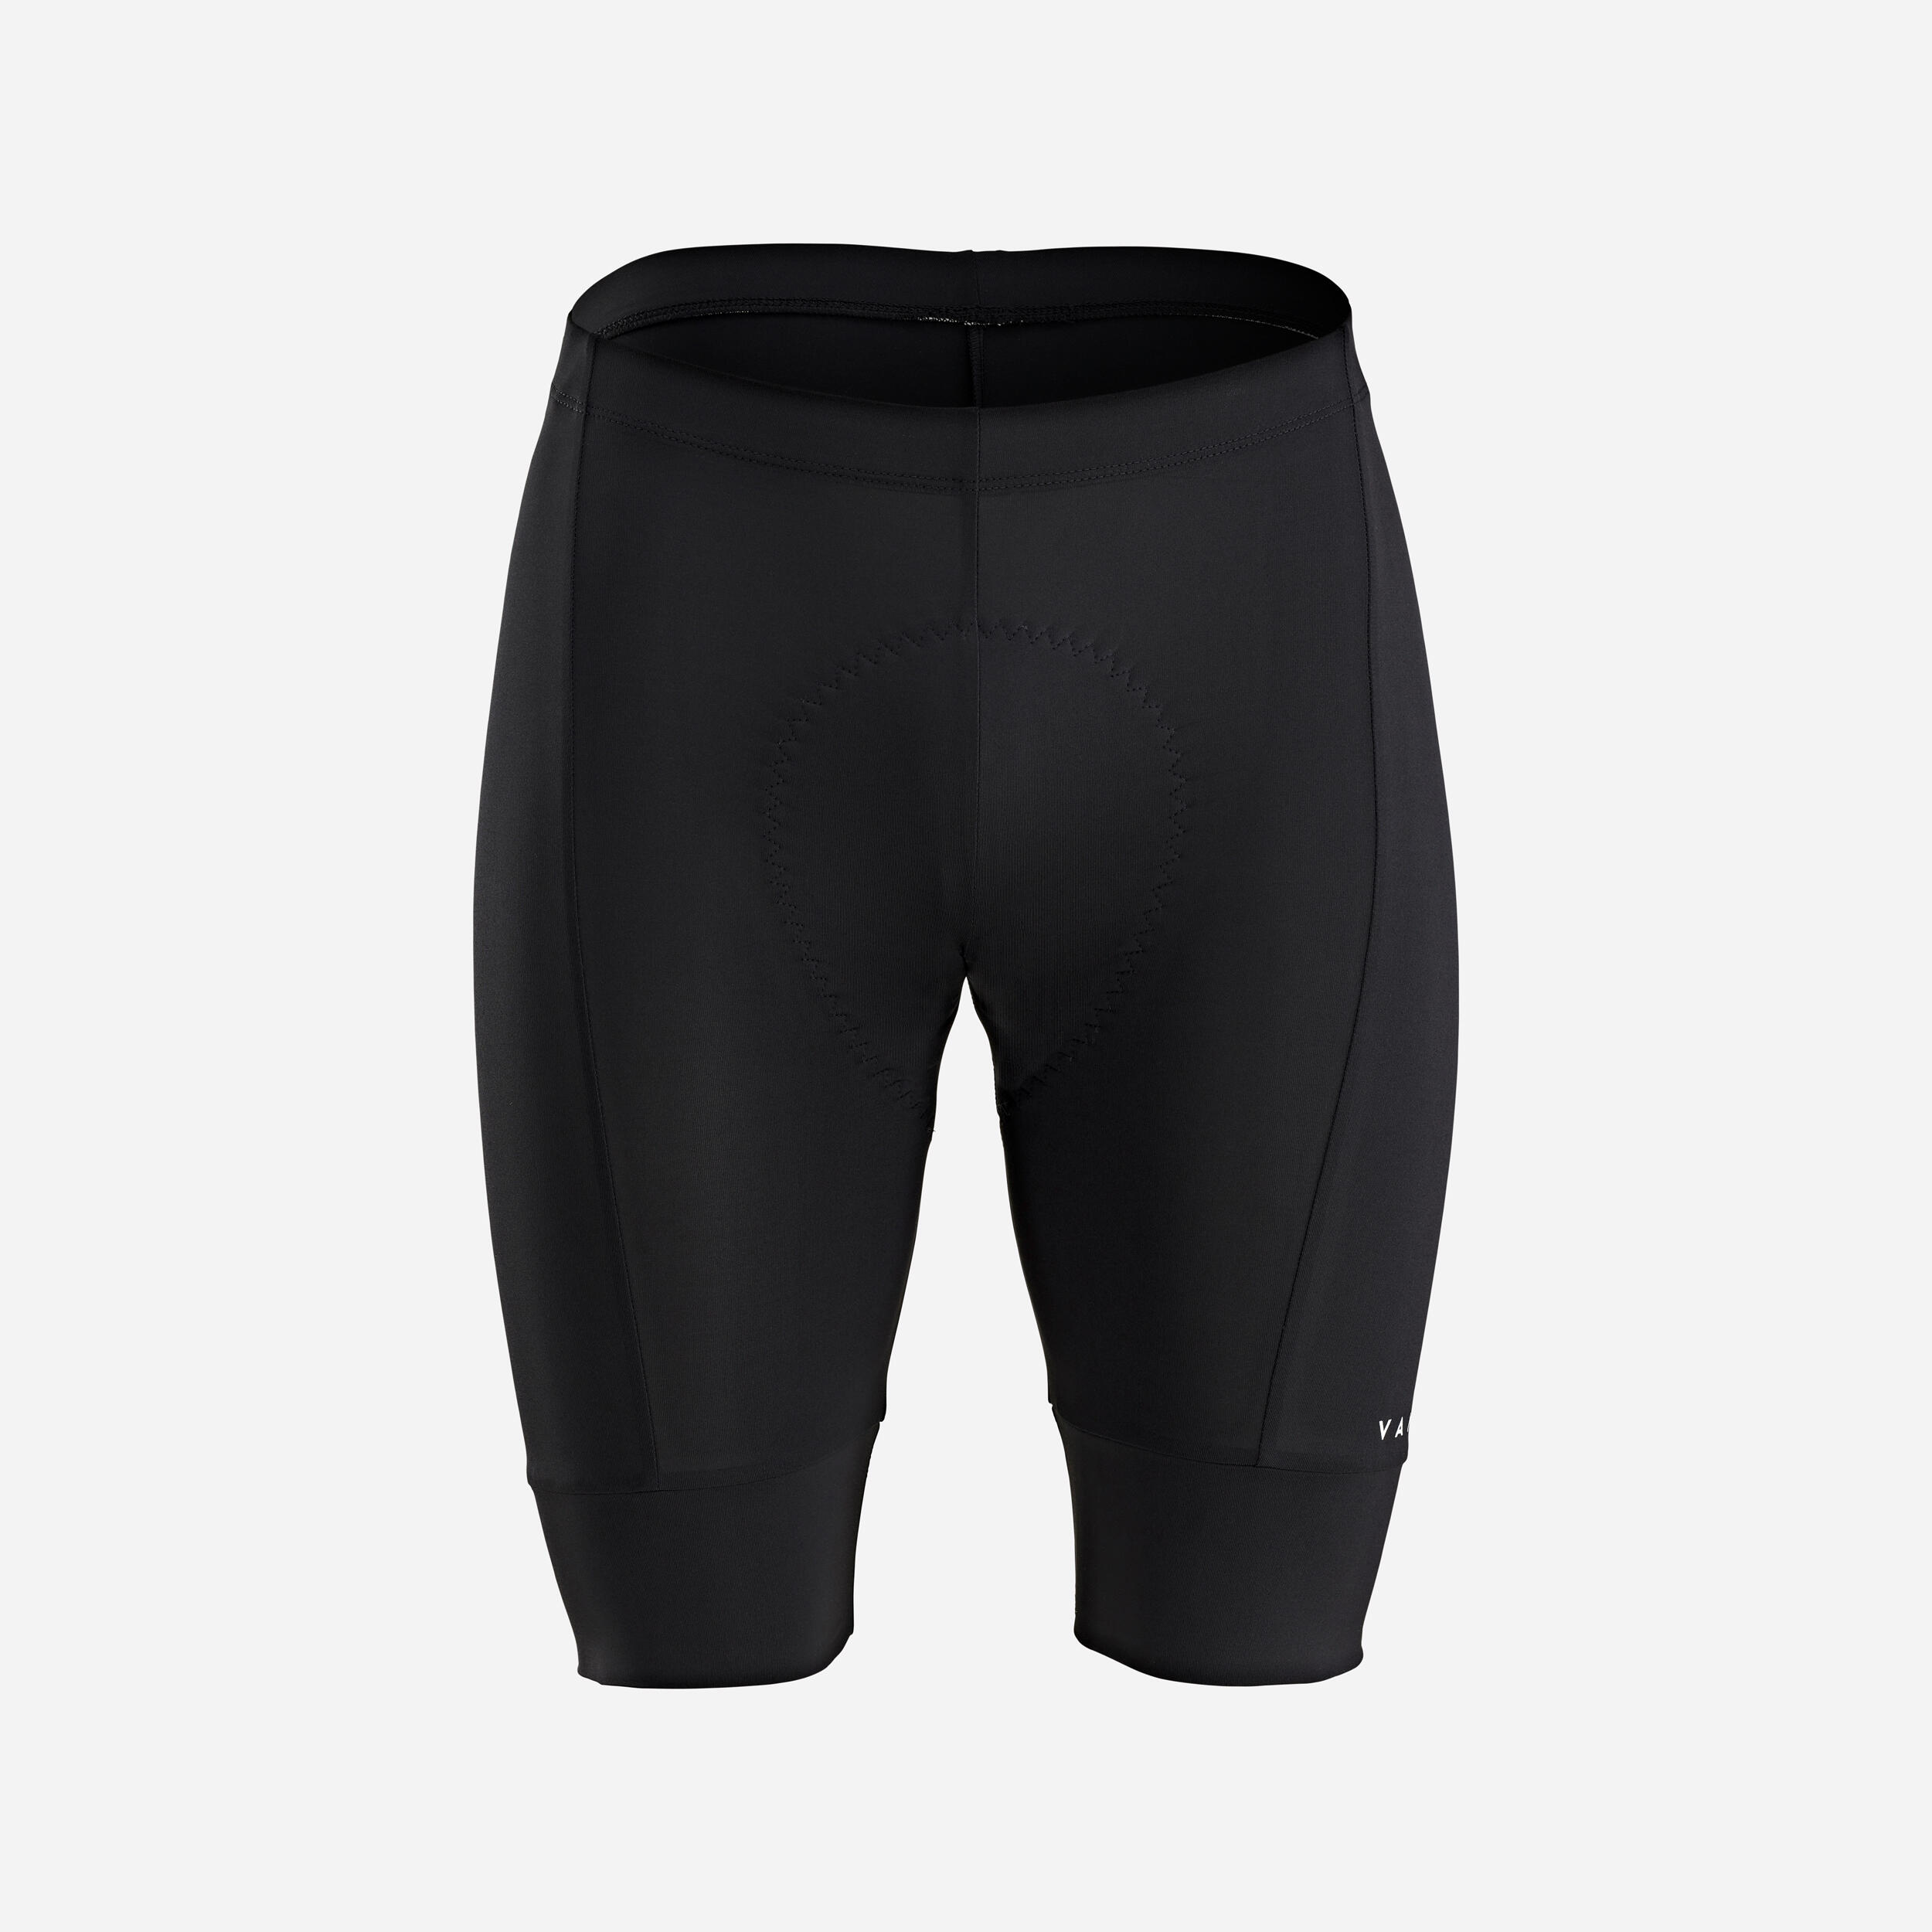 Essential Men's Road Cycling Bibless Shorts 1/8